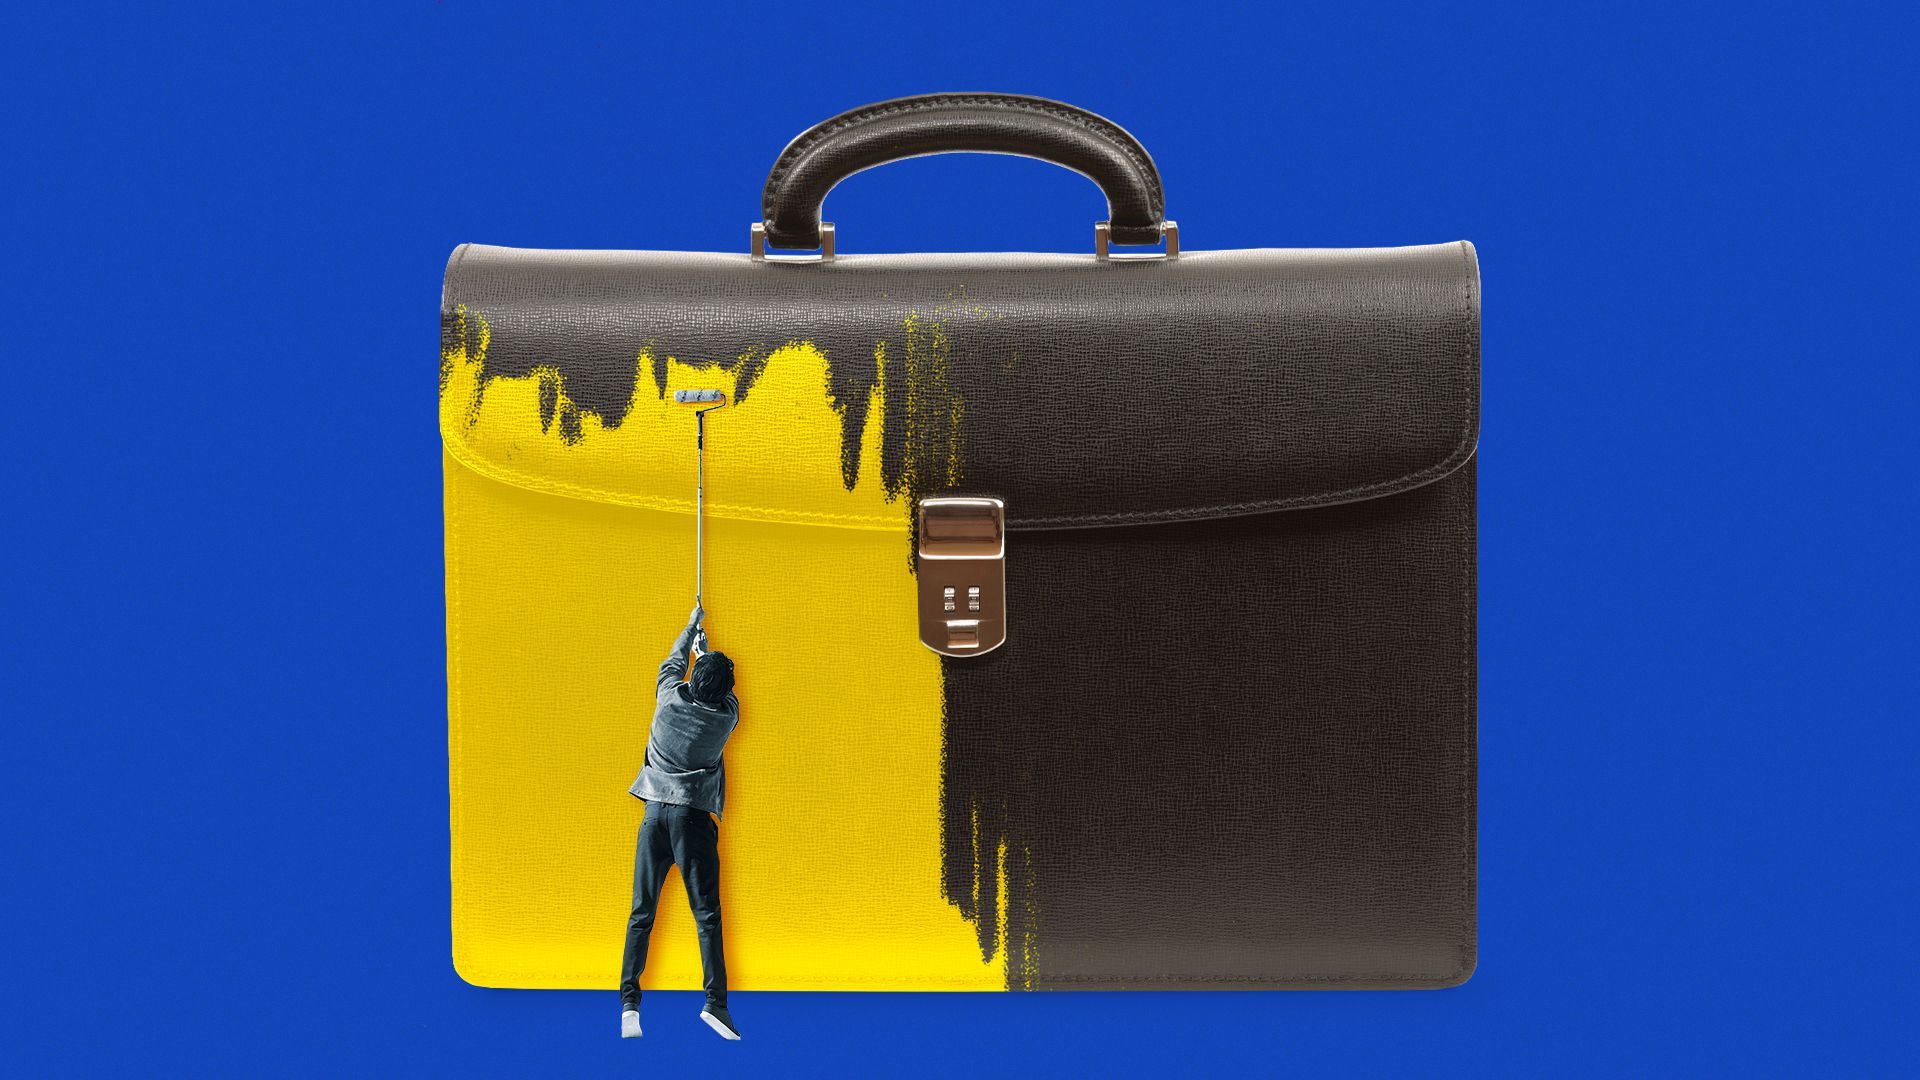 Illustration of a tiny person painting a briefcase yellow